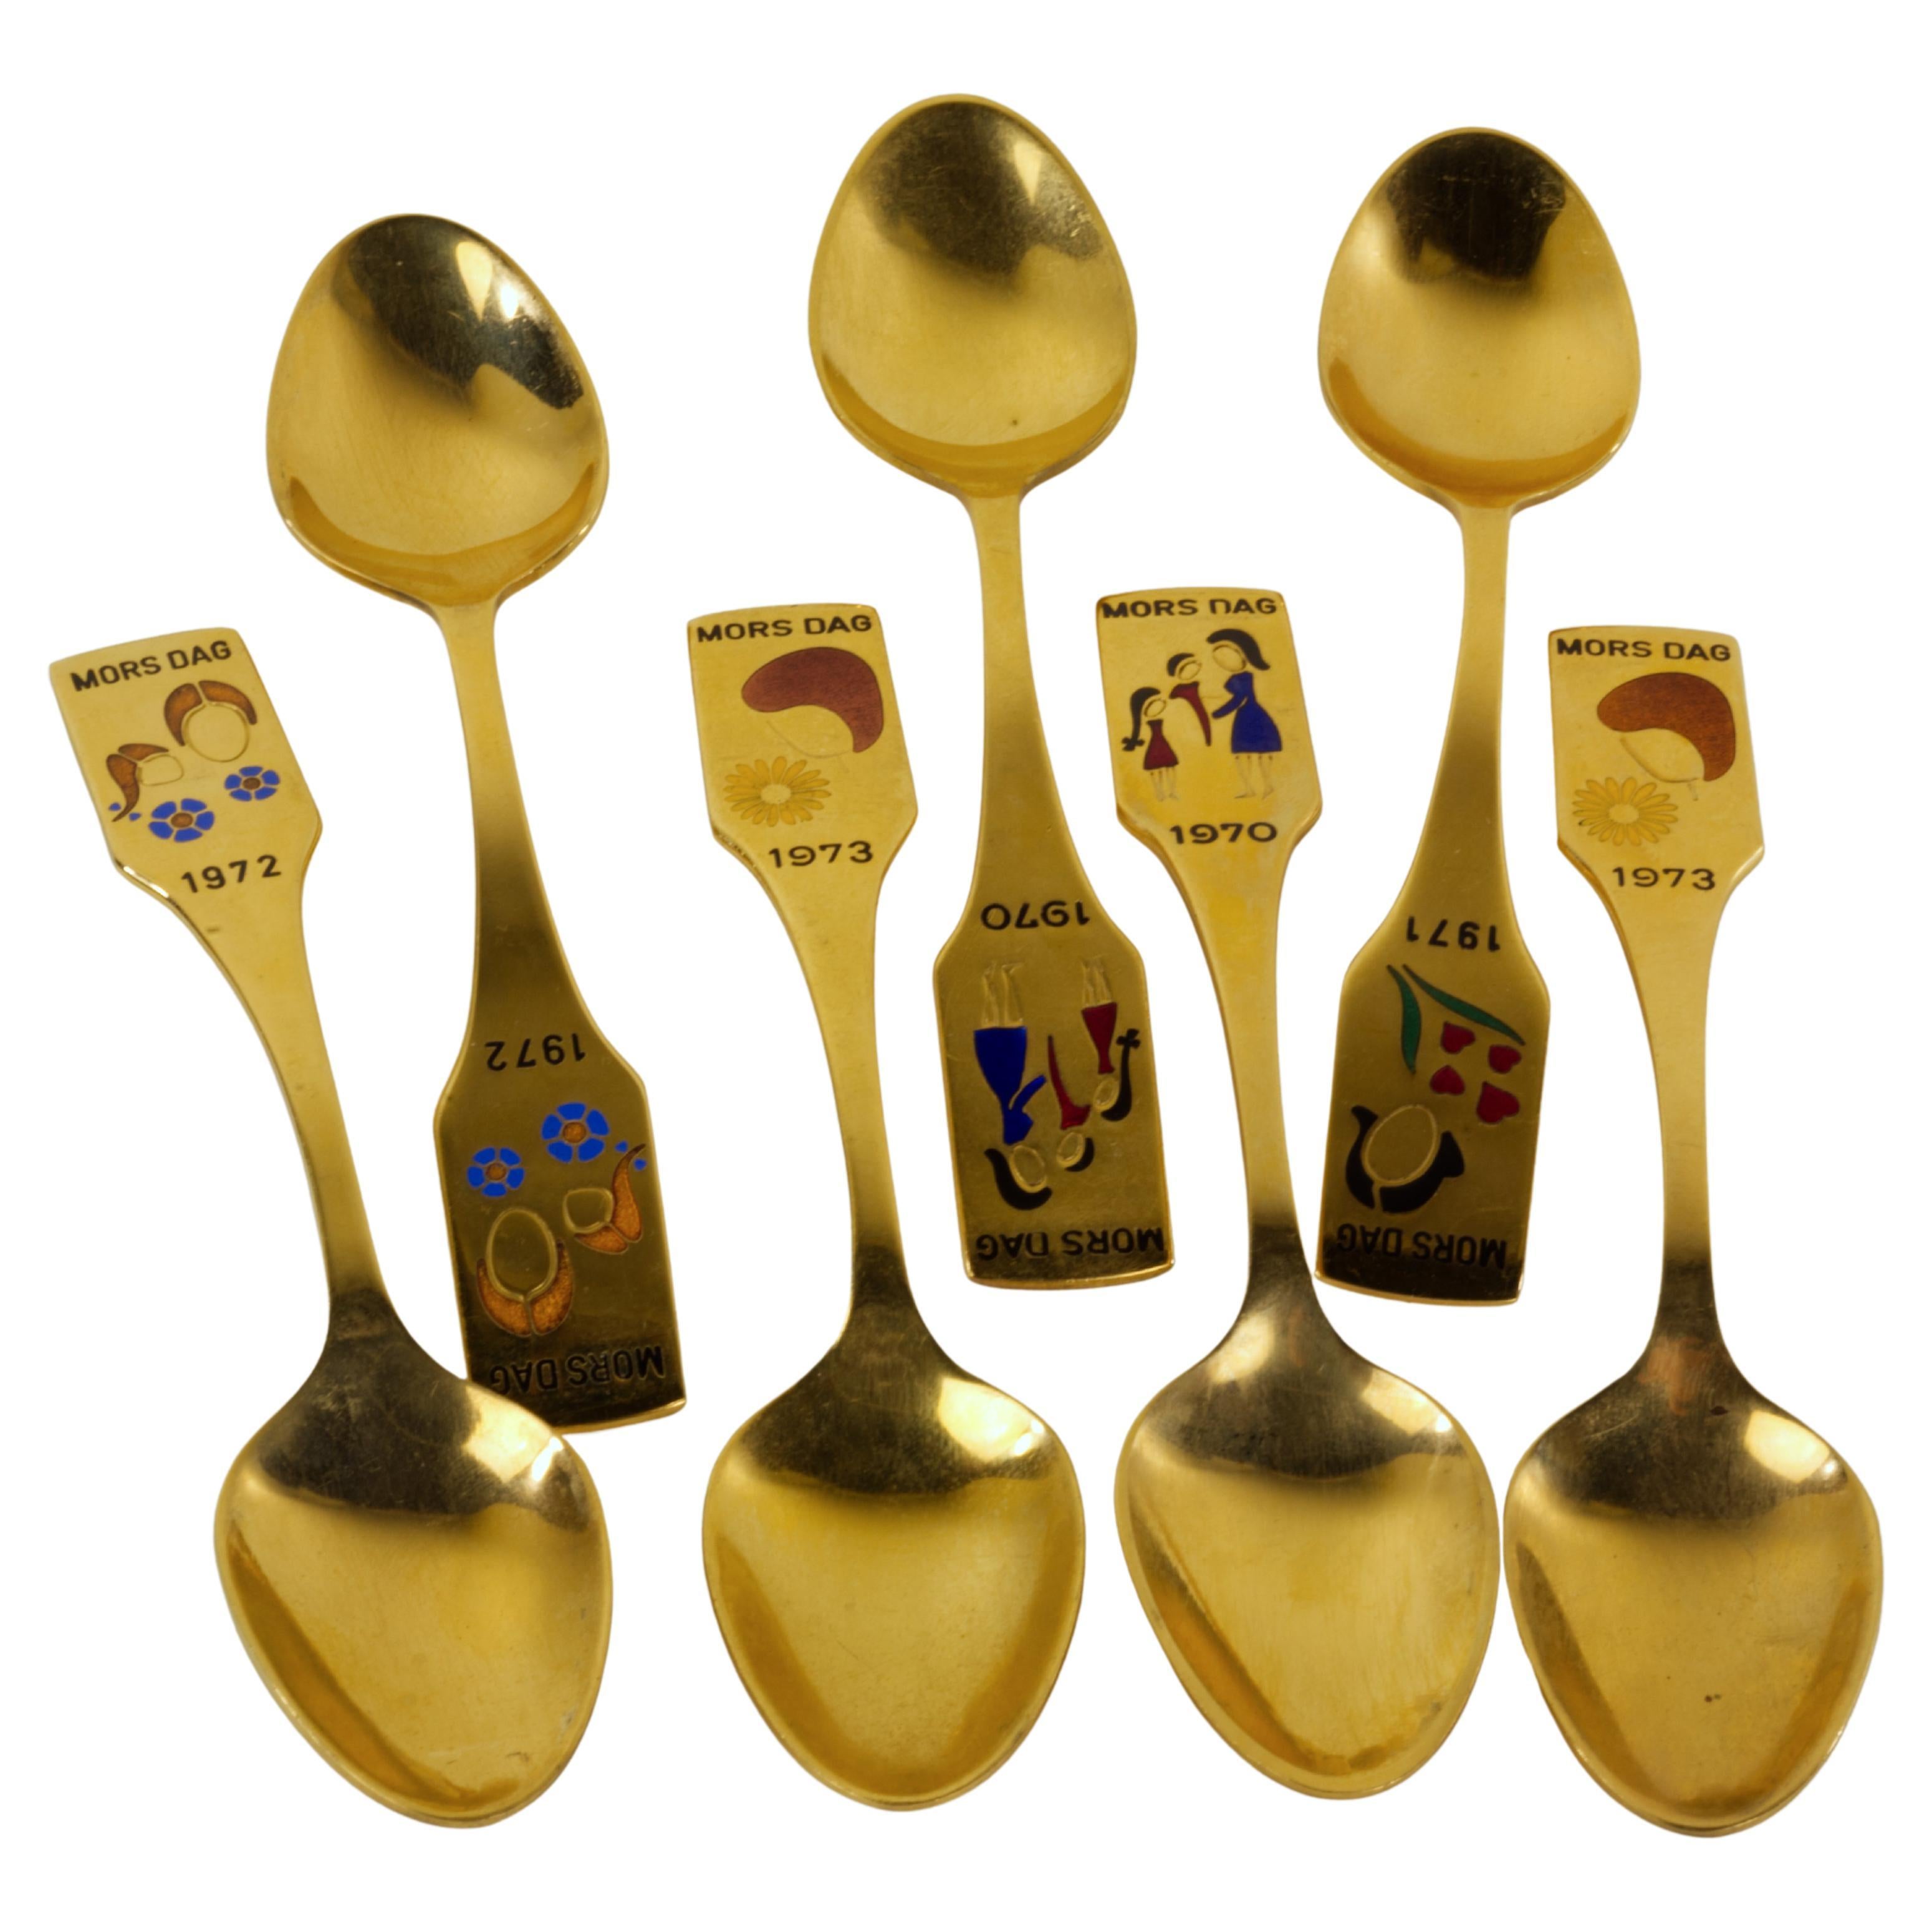  Set of gold-plated spoons with enamel decor consists of 7 limited edition spoons for years 1970 (1 spoons), 1971 (1 spoon), 1972 (2 spoons), and 1973 (2 spoons). Each year has a unique enameled design. The design was created by Falle Uldall